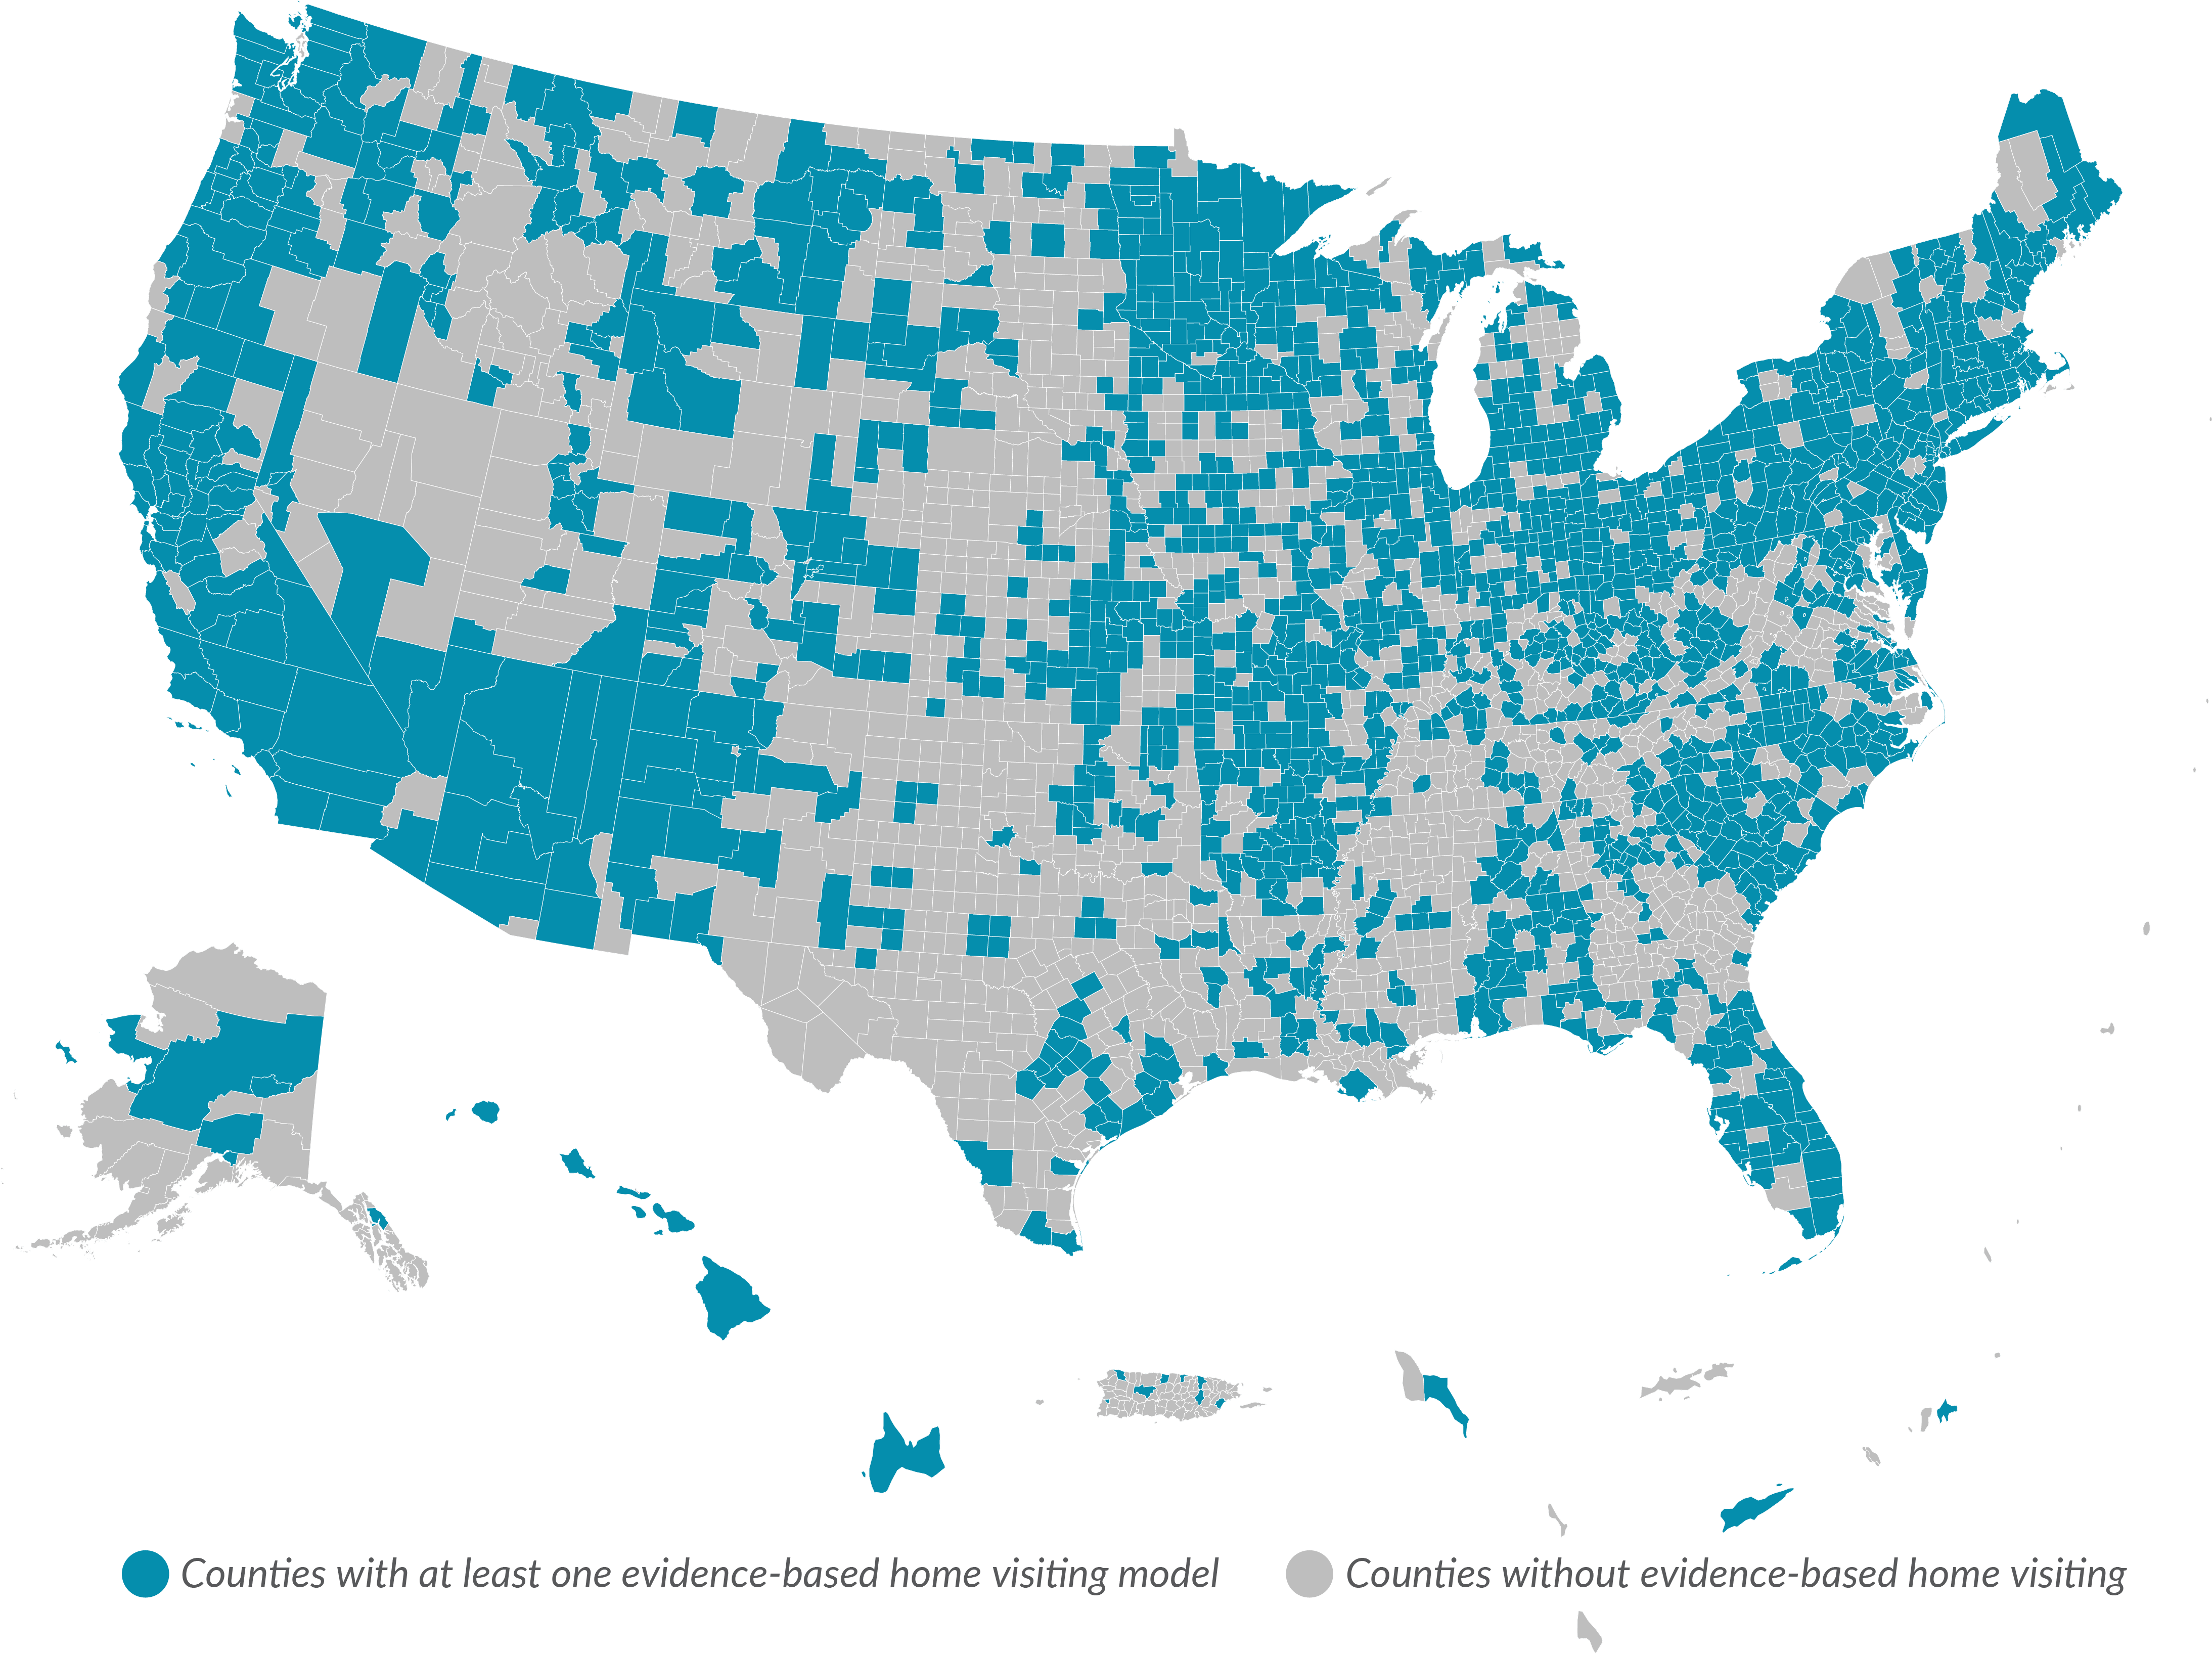 Map showing evidence-based home visiting by county. Counties with at least one evidence-based home visiting model are shaded blue.